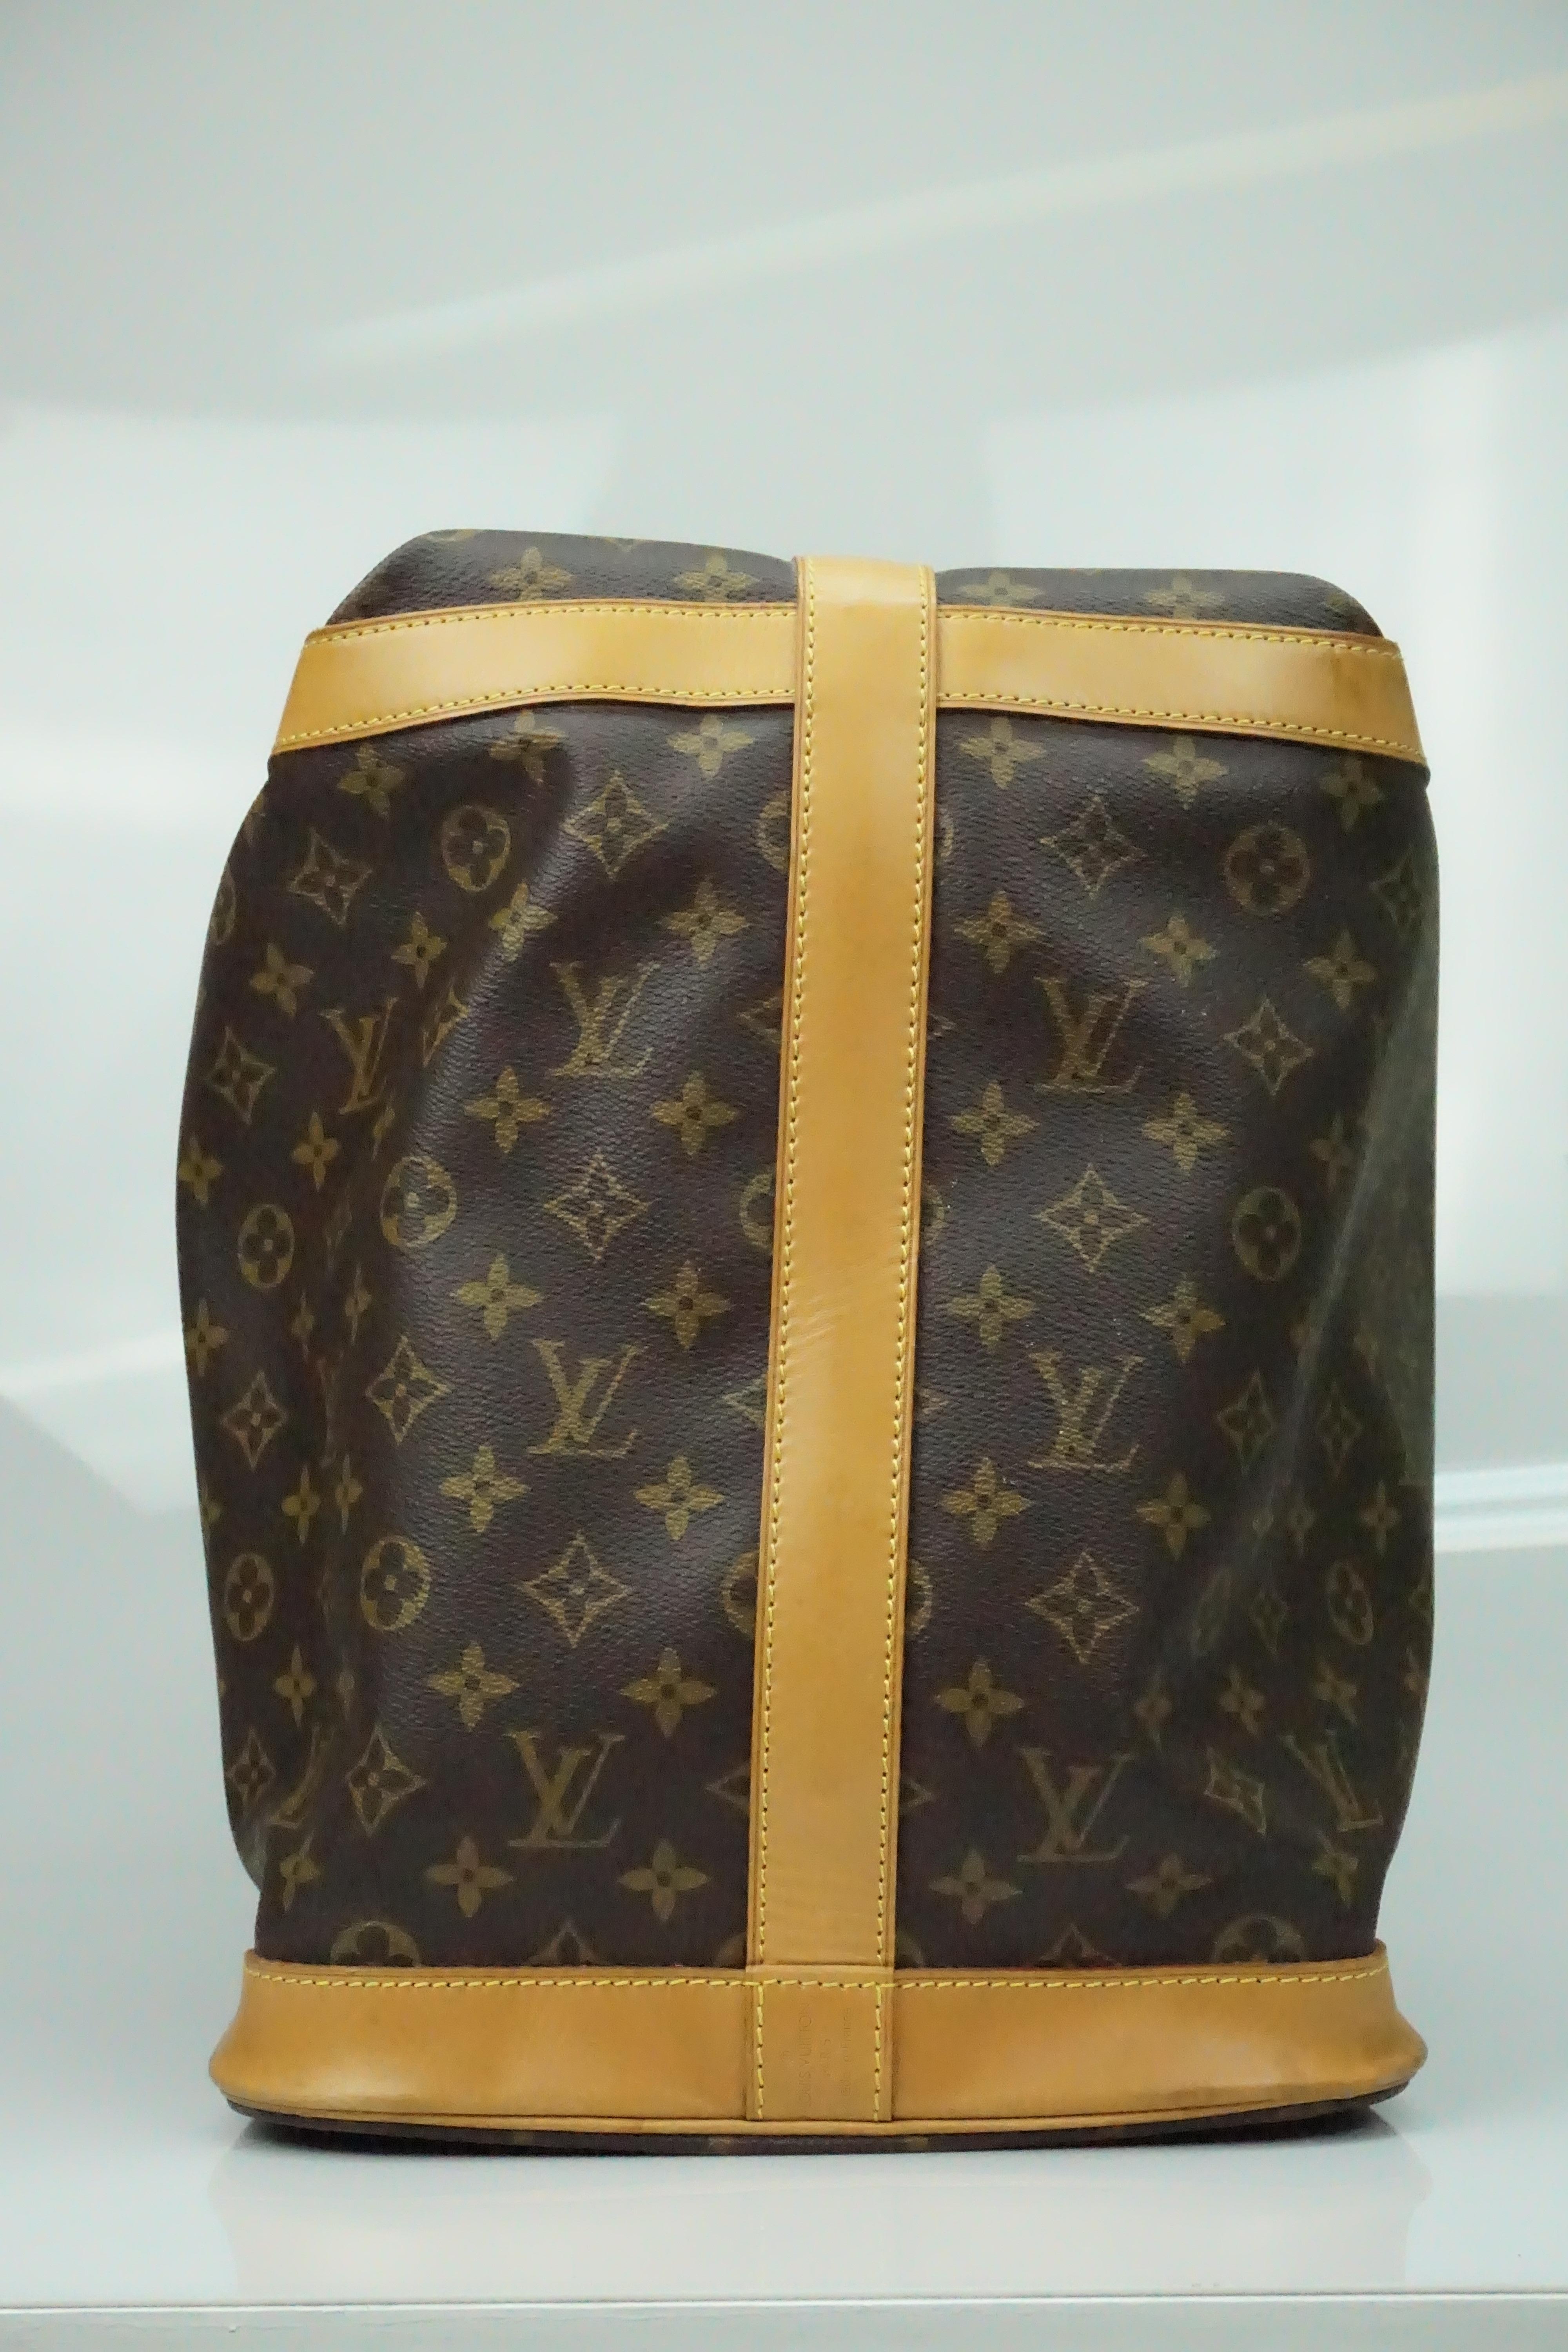 Louis Vuitton Monogram Grimaud Shoe Bag Luggage  This beautiful luggage is in good condition. There are some marks on the outside of the luggage but nothing of significance.  The inside is in great condition and has sections to put shoes in each